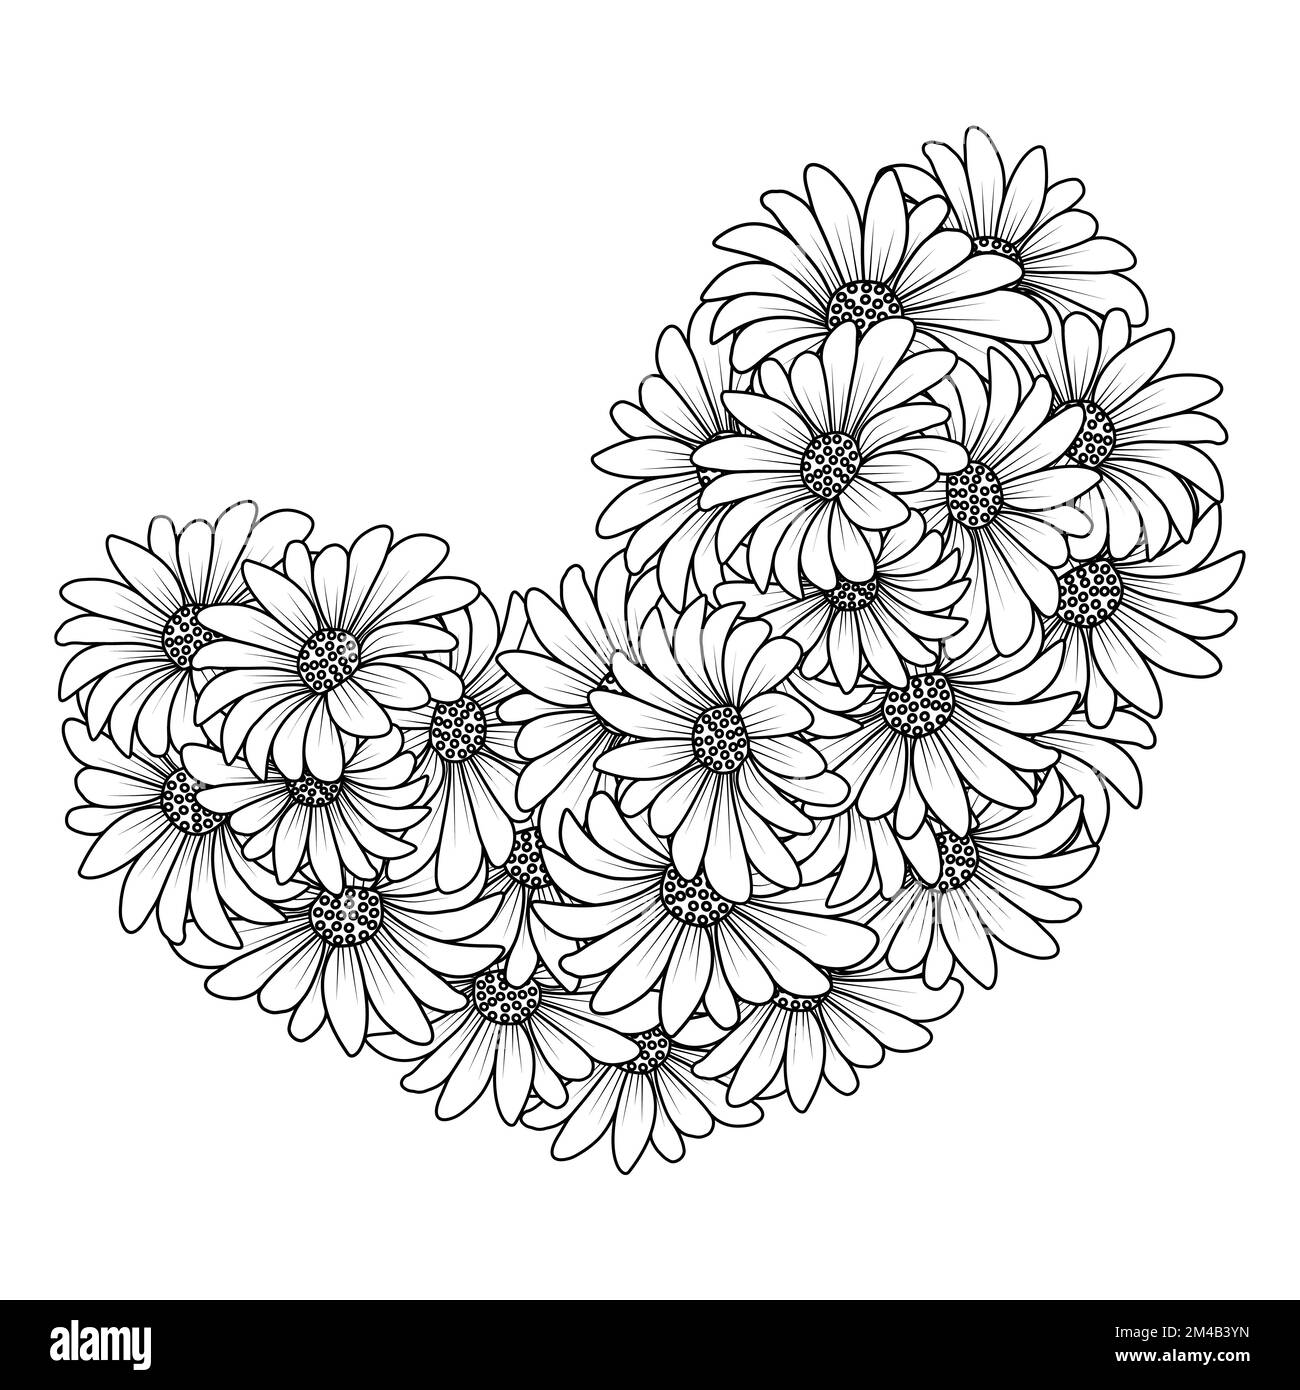 blossom daisy flower simplicity sketchy with artistic illustration on isolate background Stock Vector